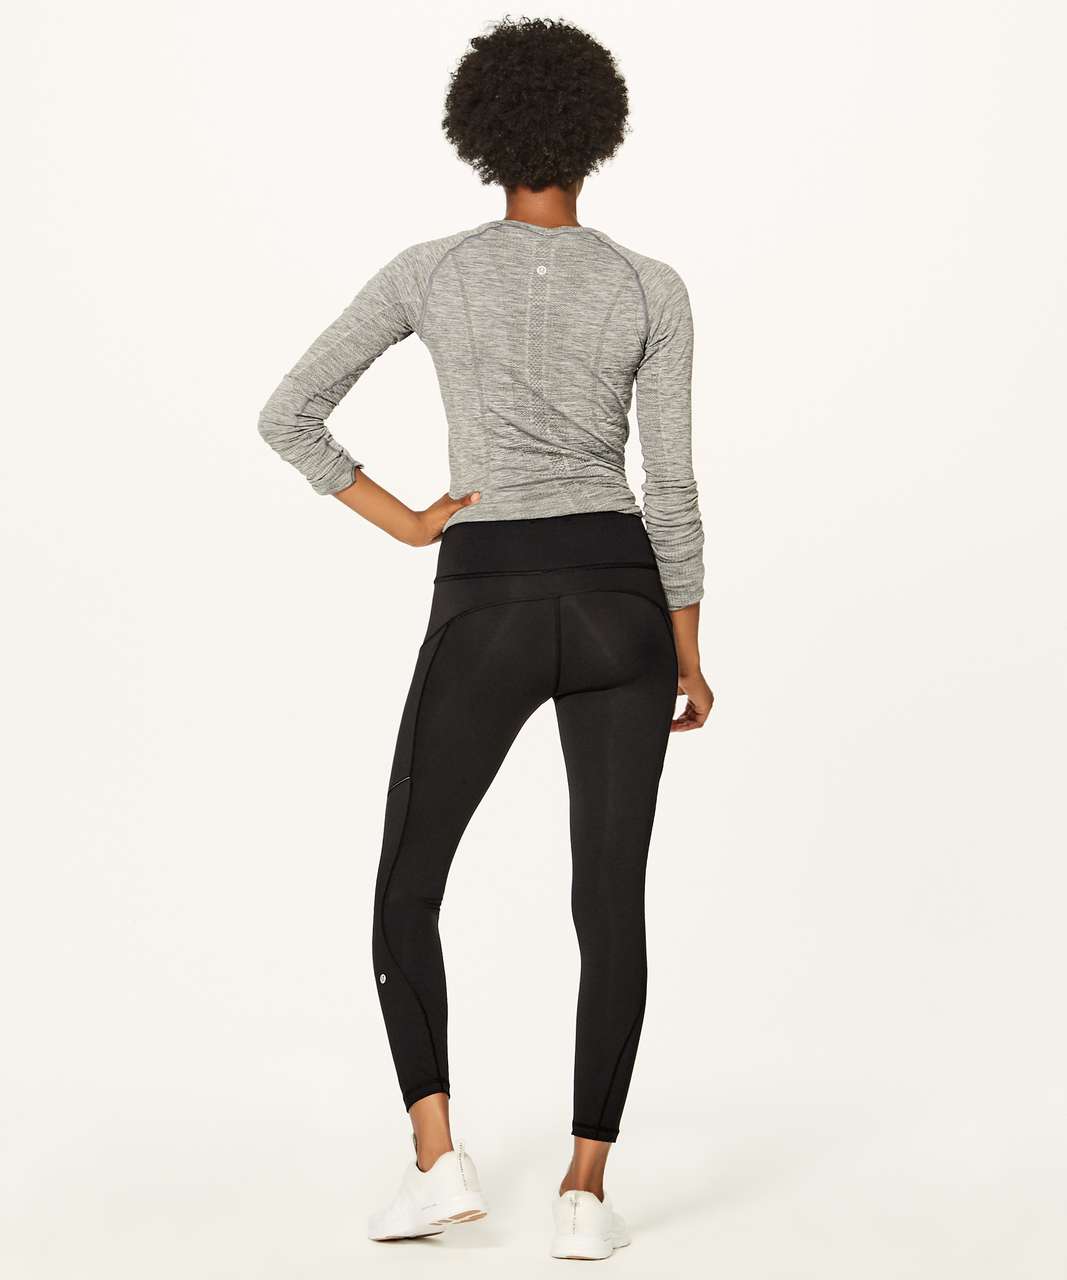 Lululemon Fast and Free Tights Review - Agent Athletica  Running tights  women, Running clothes, Fall running outfit